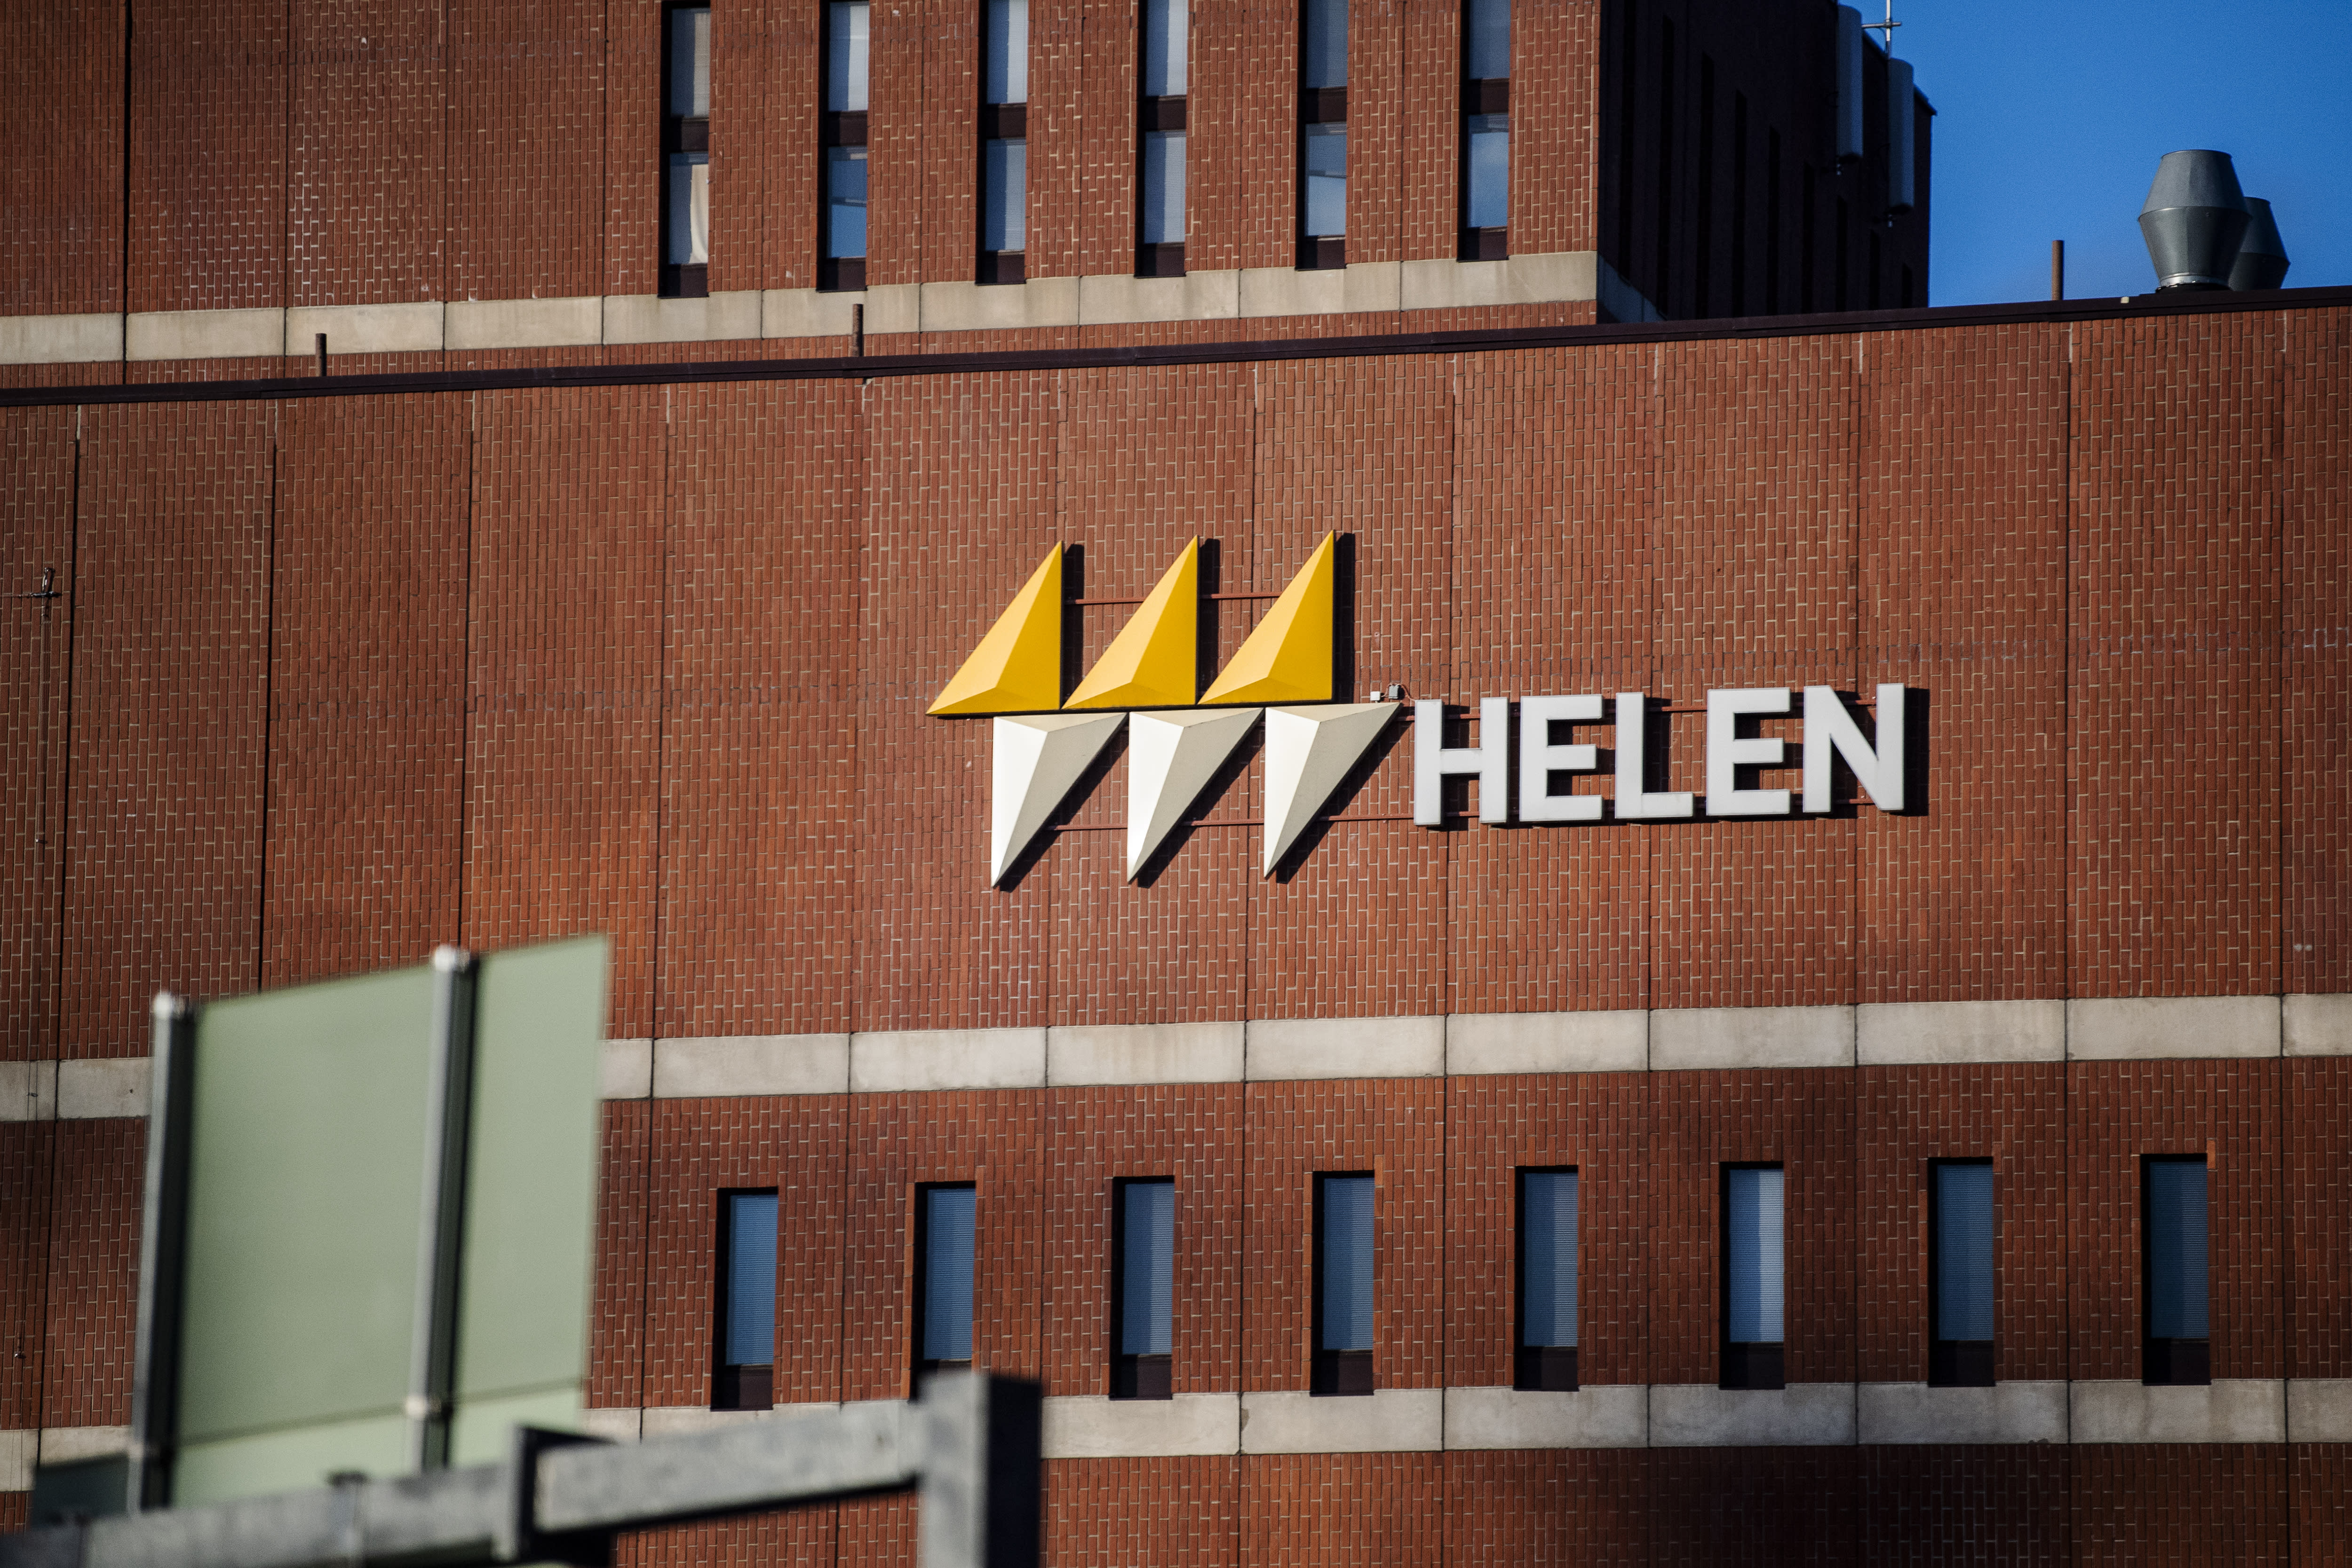 A technical fault temporarily cut off electricity for 50,000 Helsinki residents